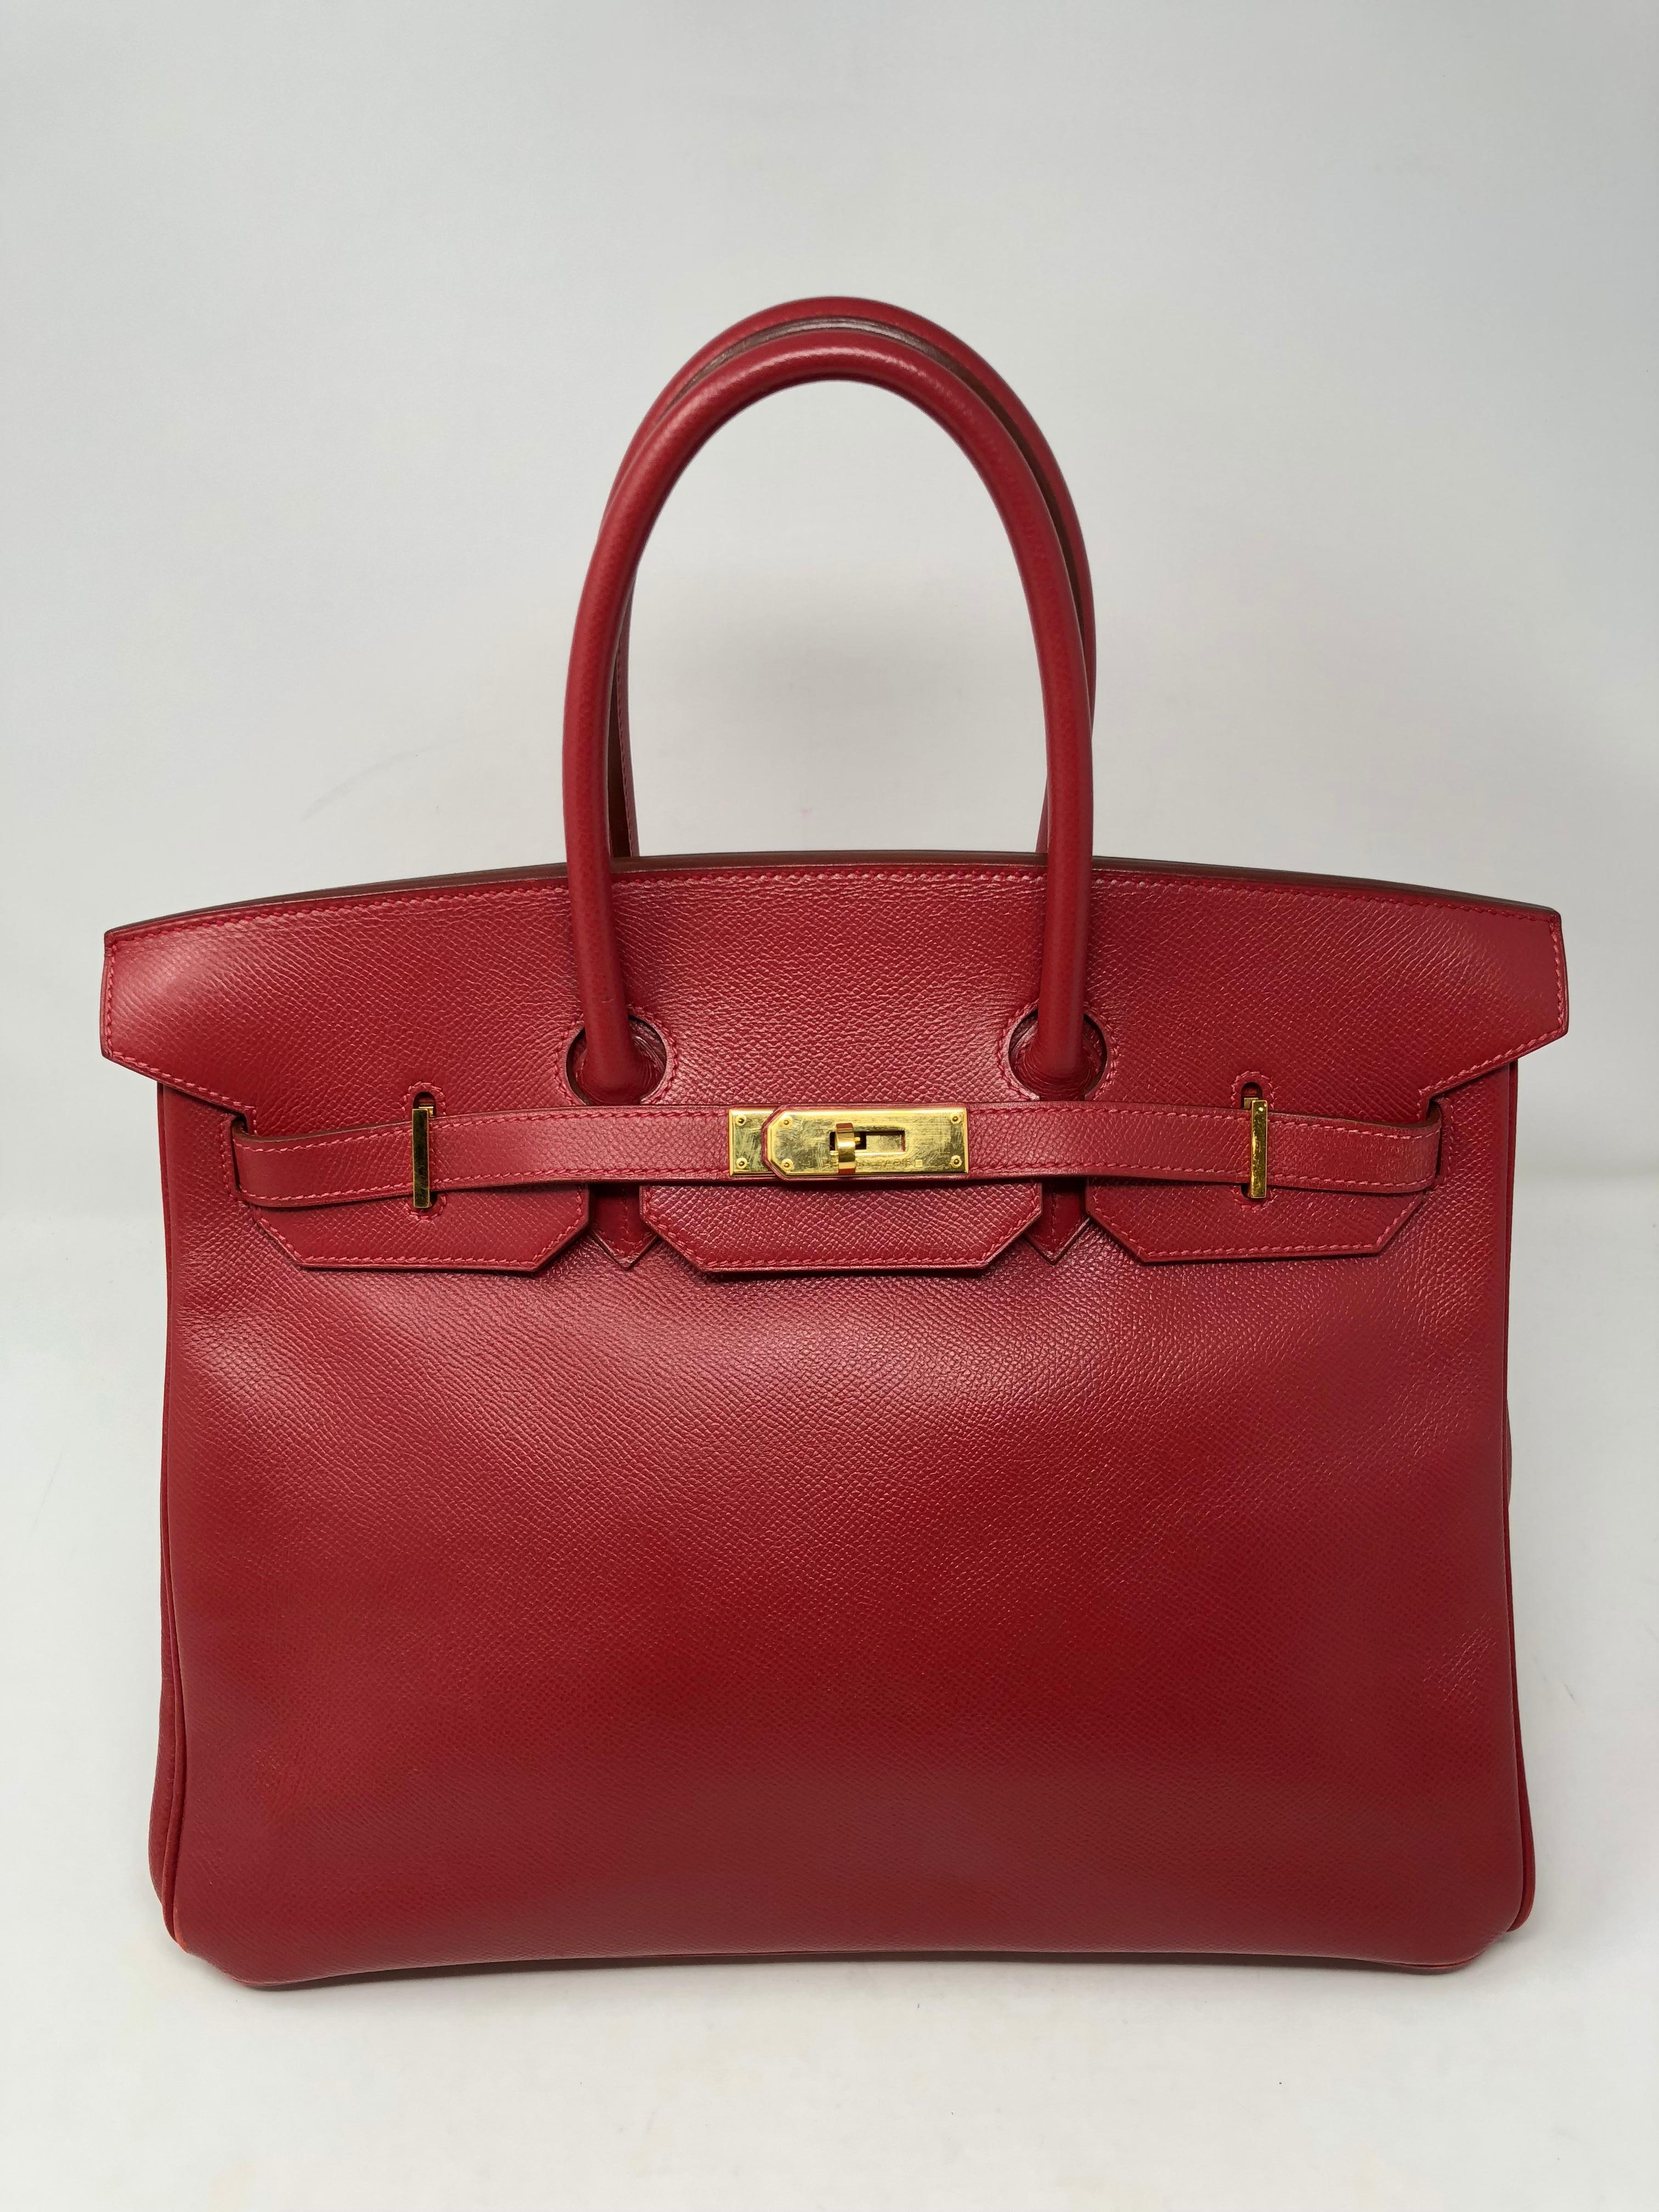 Hermes Red Birkin 35 Courchevel Leather from 1999. Beautiful red color with gold hardware. Good condition has slight wear on both corners. Comes with clochette and keys. A vintage Hermes that will stay a classic for life. Red with gold hardware is a